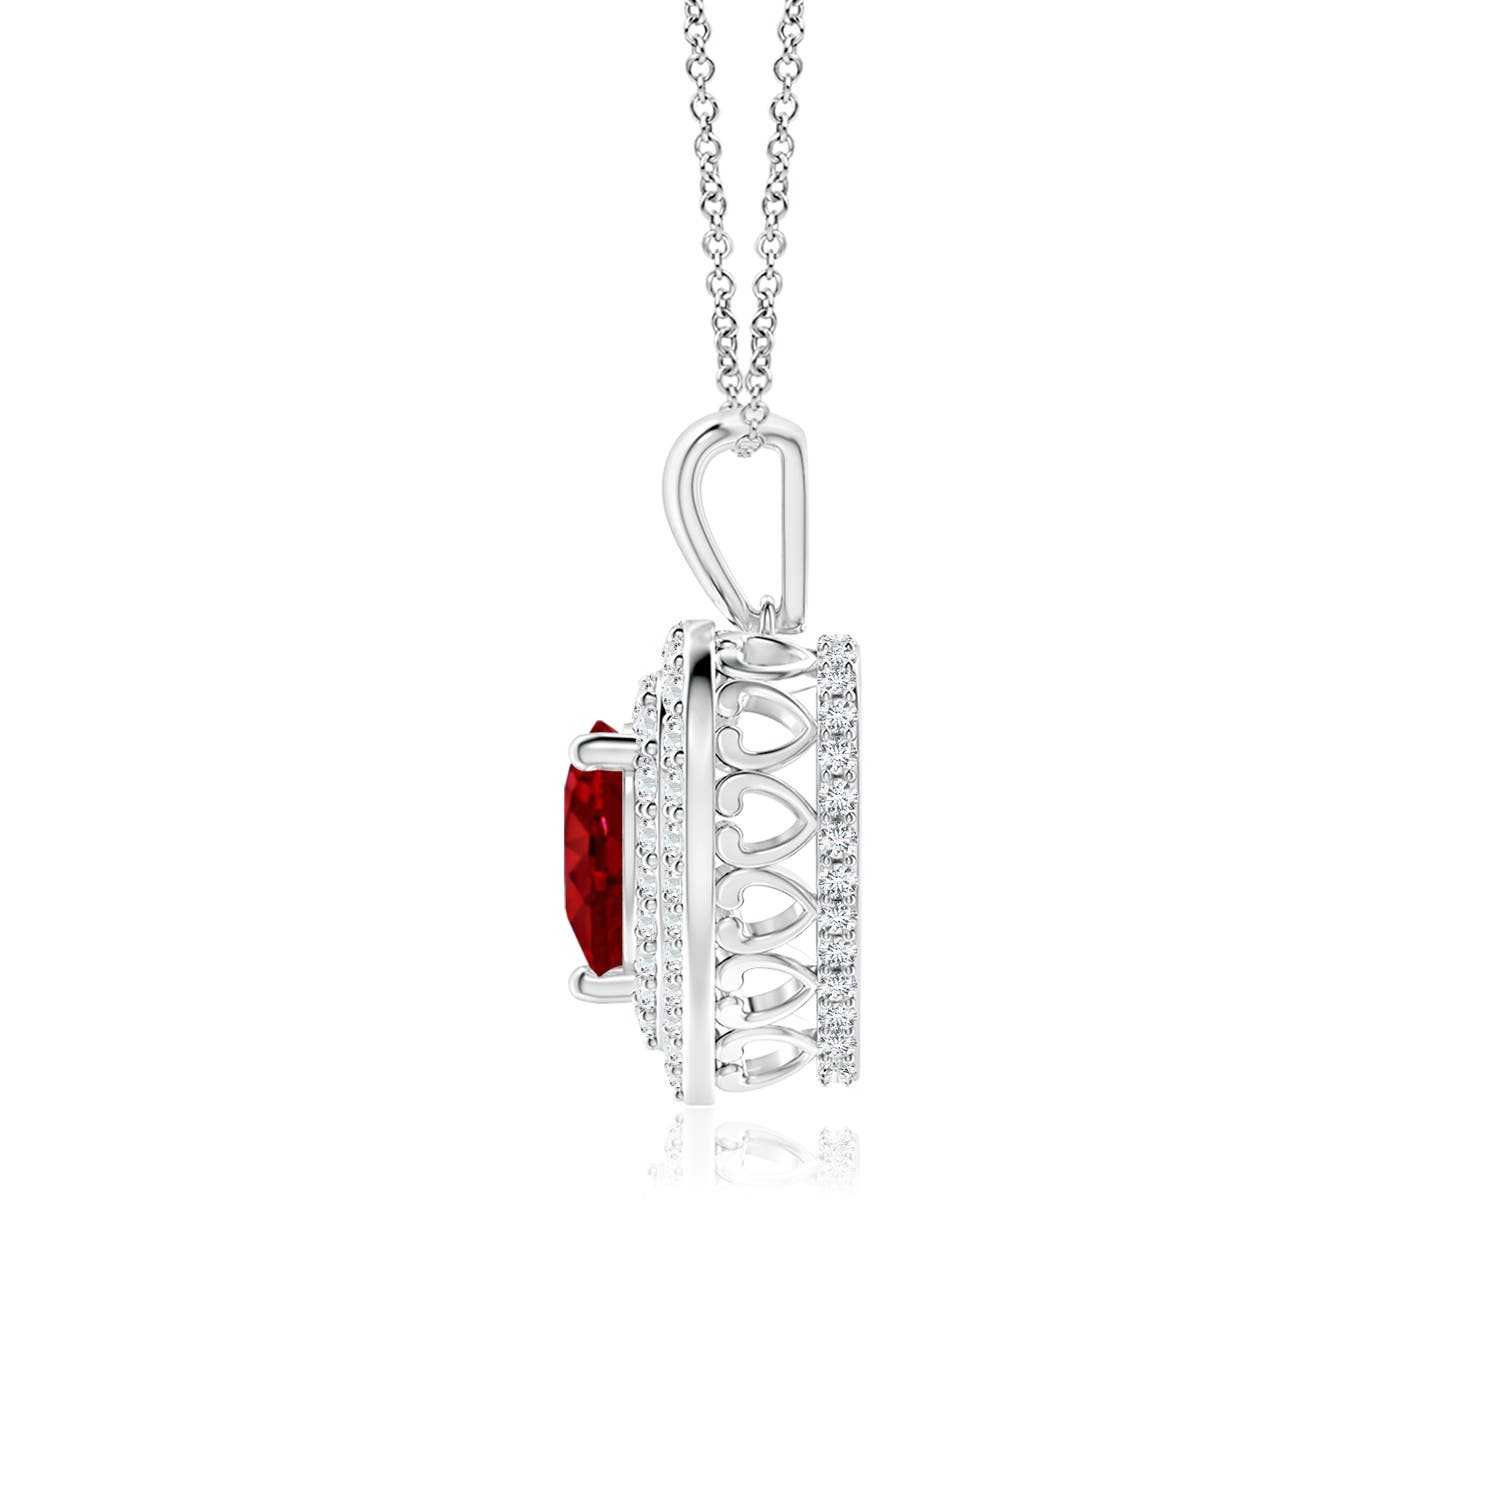 AAAA - Ruby / 1.25 CT / 14 KT White Gold